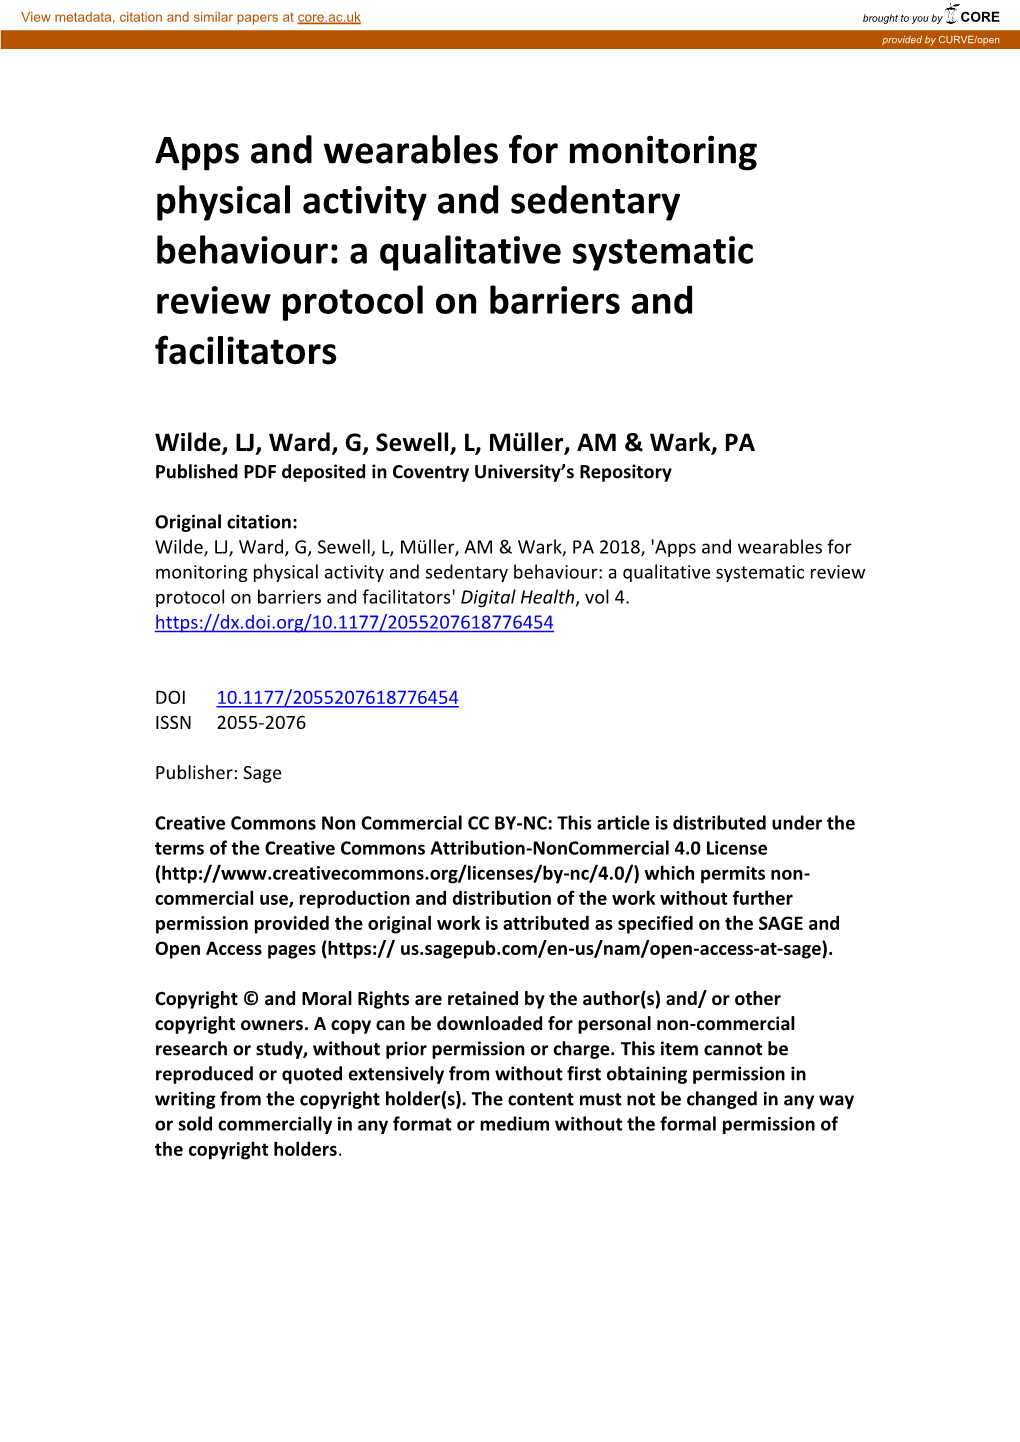 Apps and Wearables for Monitoring Physical Activity and Sedentary Behaviour: a Qualitative Systematic Review Protocol on Barriers and Facilitators